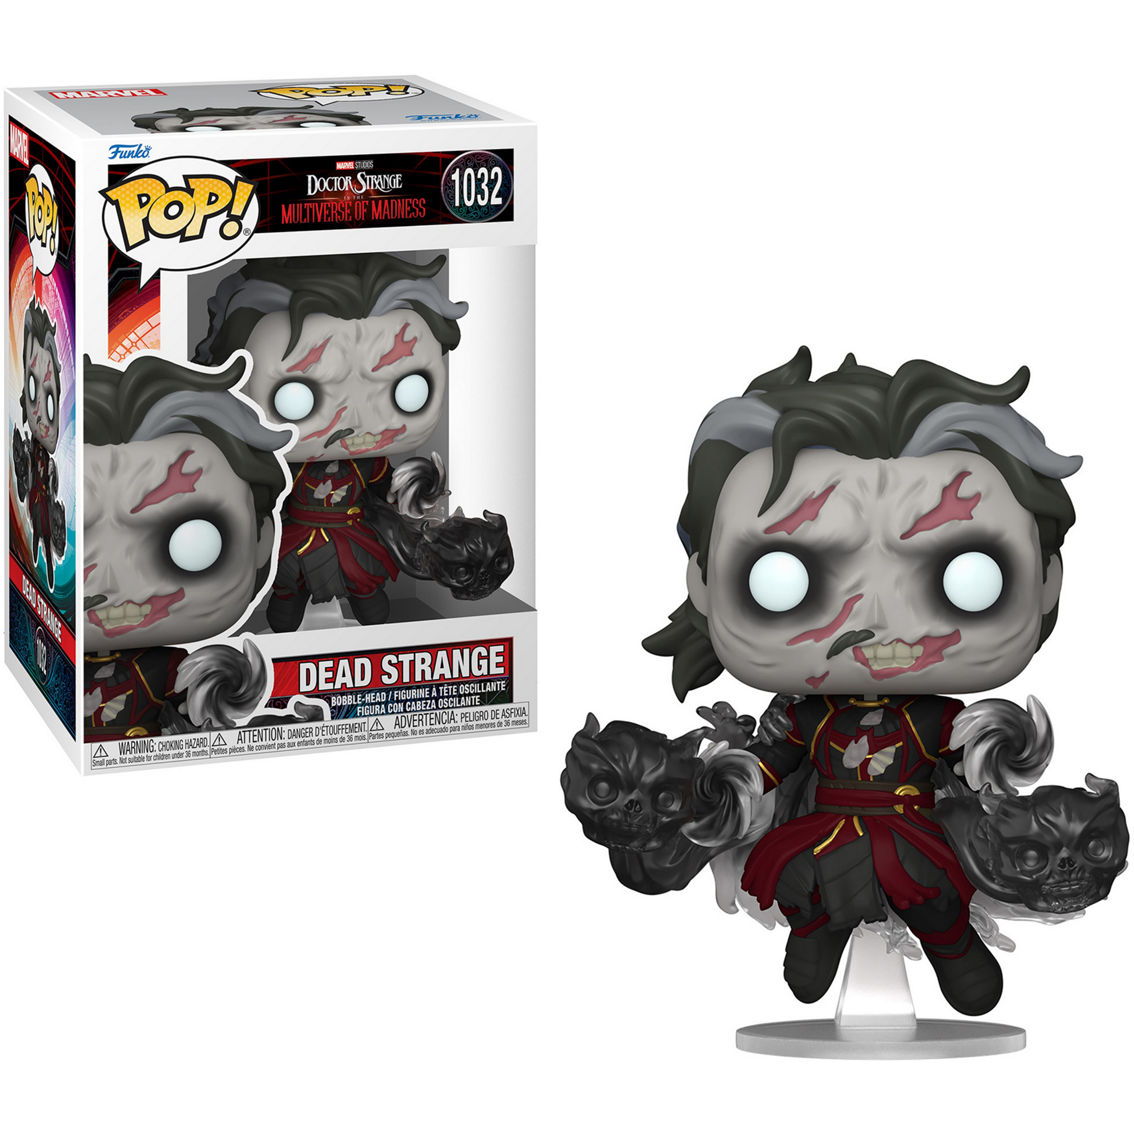 Funko Pop! Marvel: Doctor Strange in the Multiverse of Madness Collectors Set - Image 6 of 7